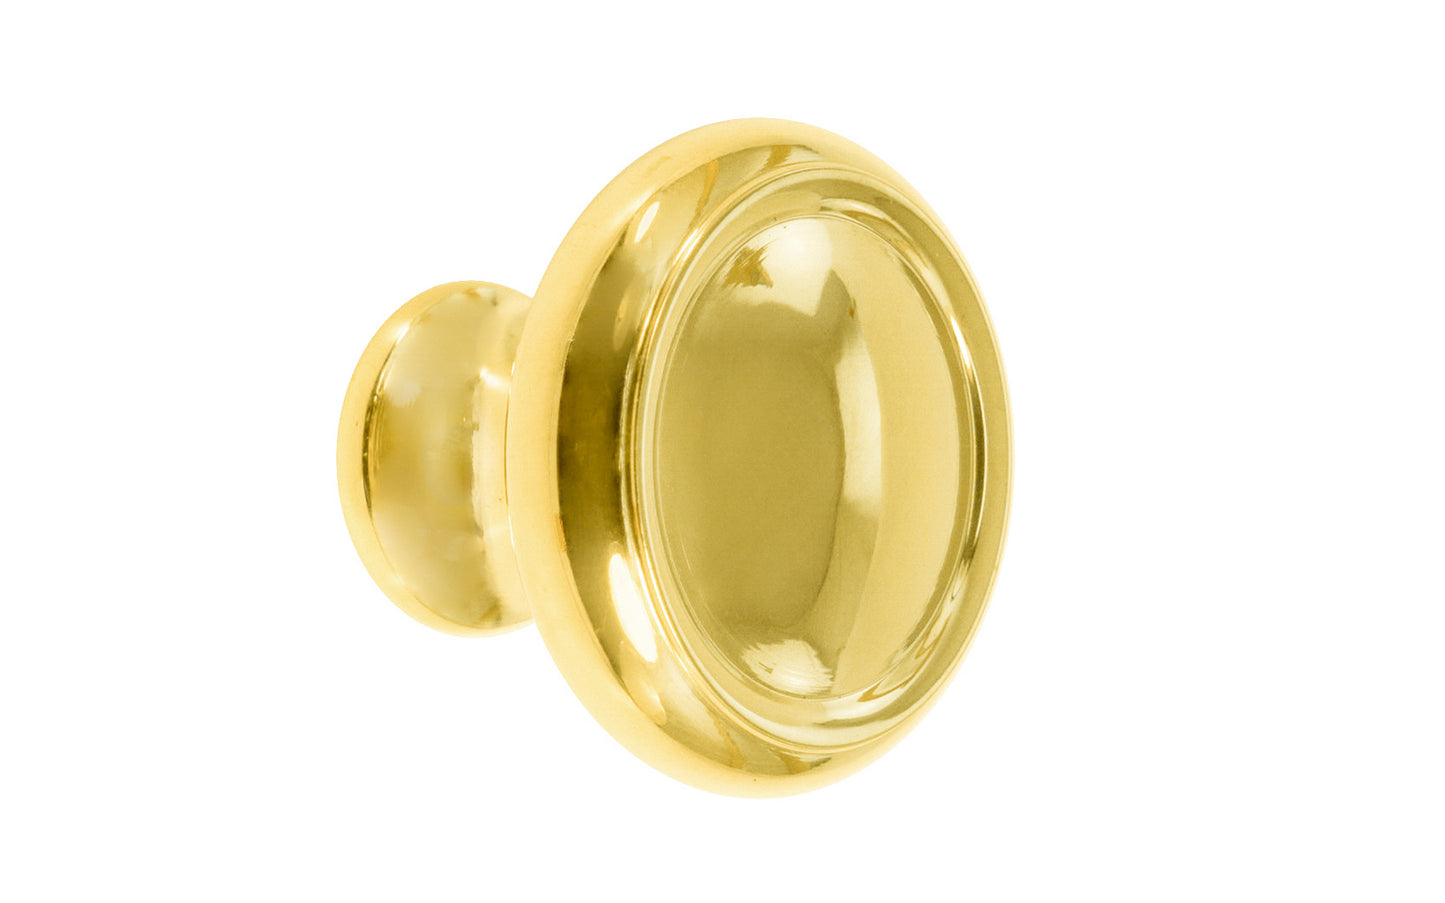 Solid Brass Dome-Style Cabinet Knob ~ 1-1/4" Diameter. Made of solid brass material. The knob is designed in the Mid-Century style of hardware, but will fit in with any time period up to the current modern styles. Great for kitchens, bathrooms, on furniture, cabinets, drawers, small doors, cabinet doors. Dome knob. Lacquered brass finish. Authentic reproduction hardware.